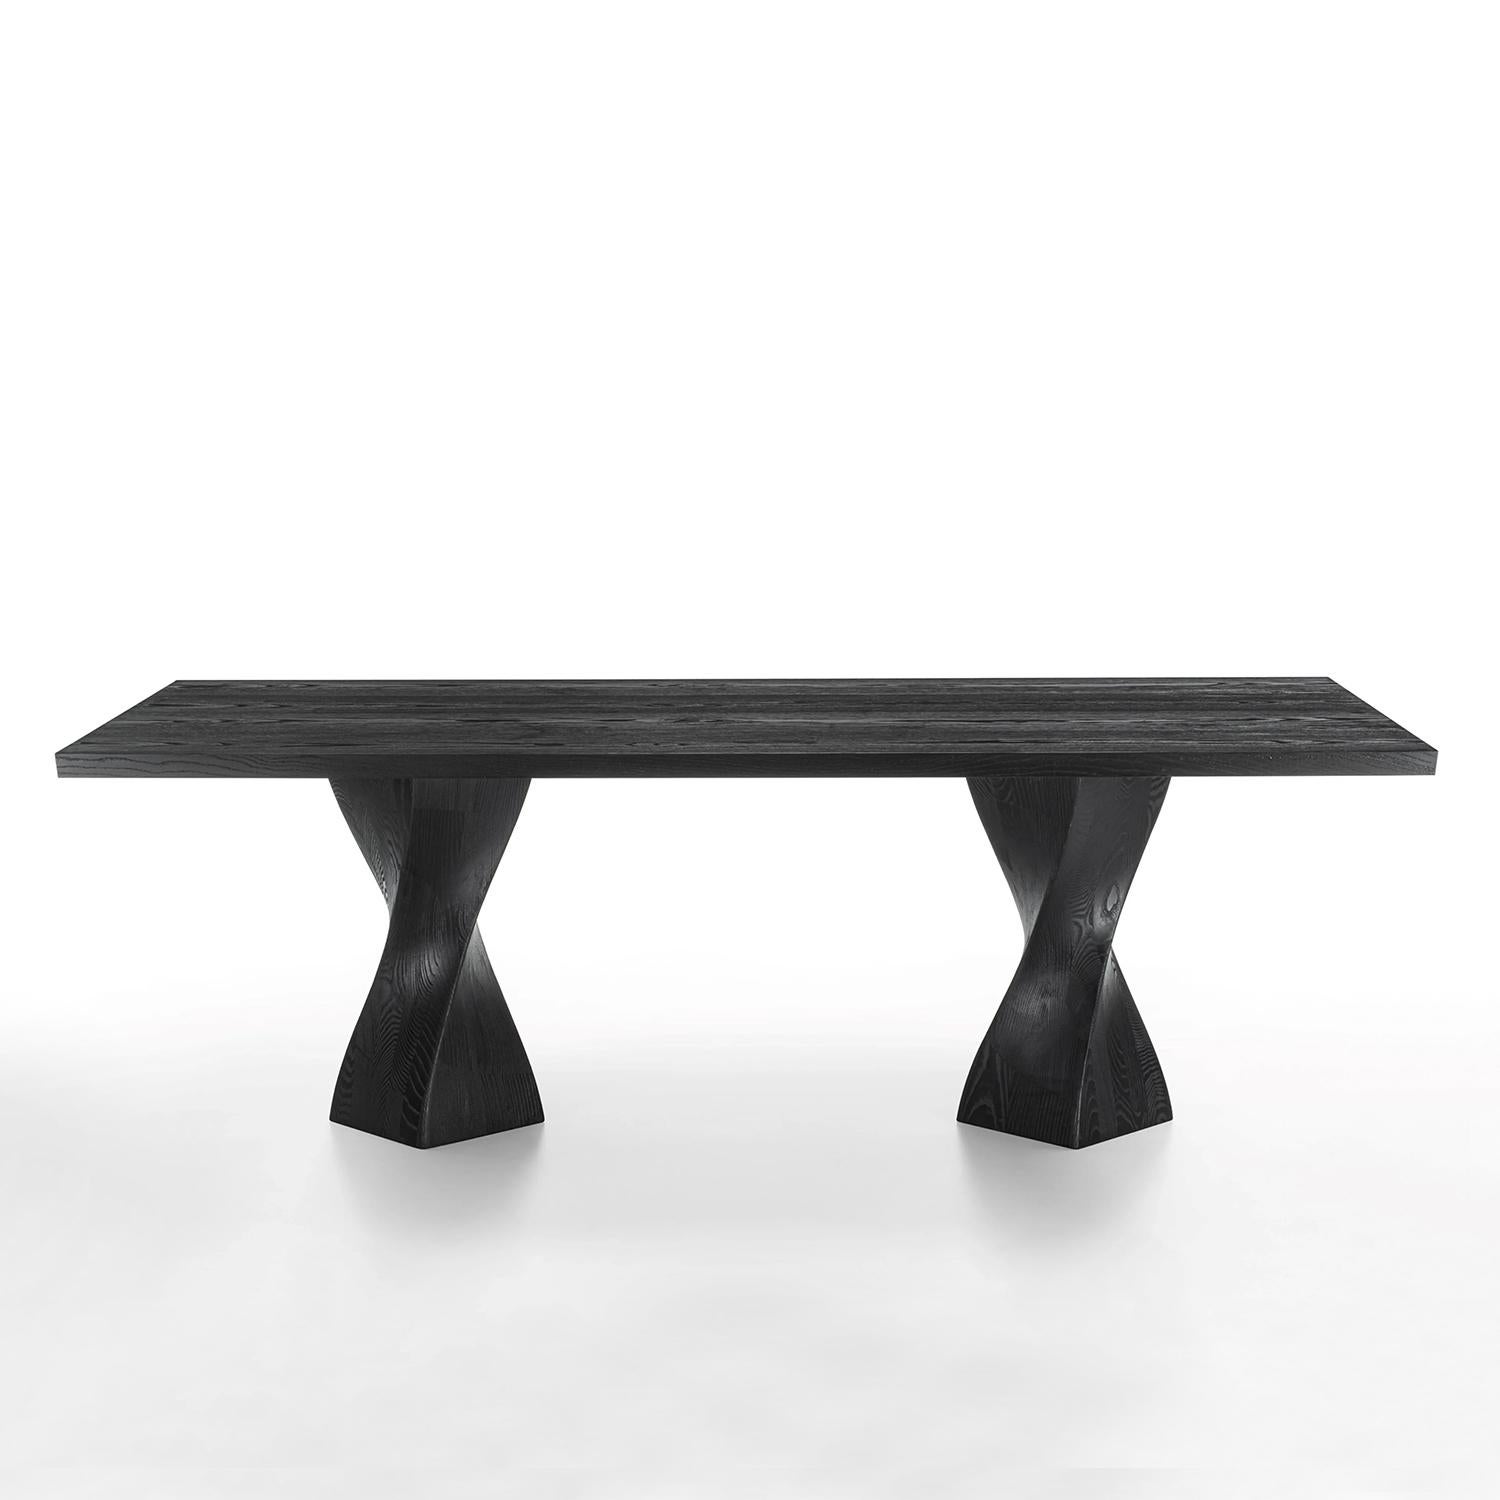 Dining Table Torsade Black with top made with 
blockboard veneered ash with bevelled edges
in black pigmented finiish.
With 2 feet in solid ash in black pigmented finish.
Also available in:
L220xD100xH75cm, price: 9400,00€
L240xD100xH75cm,